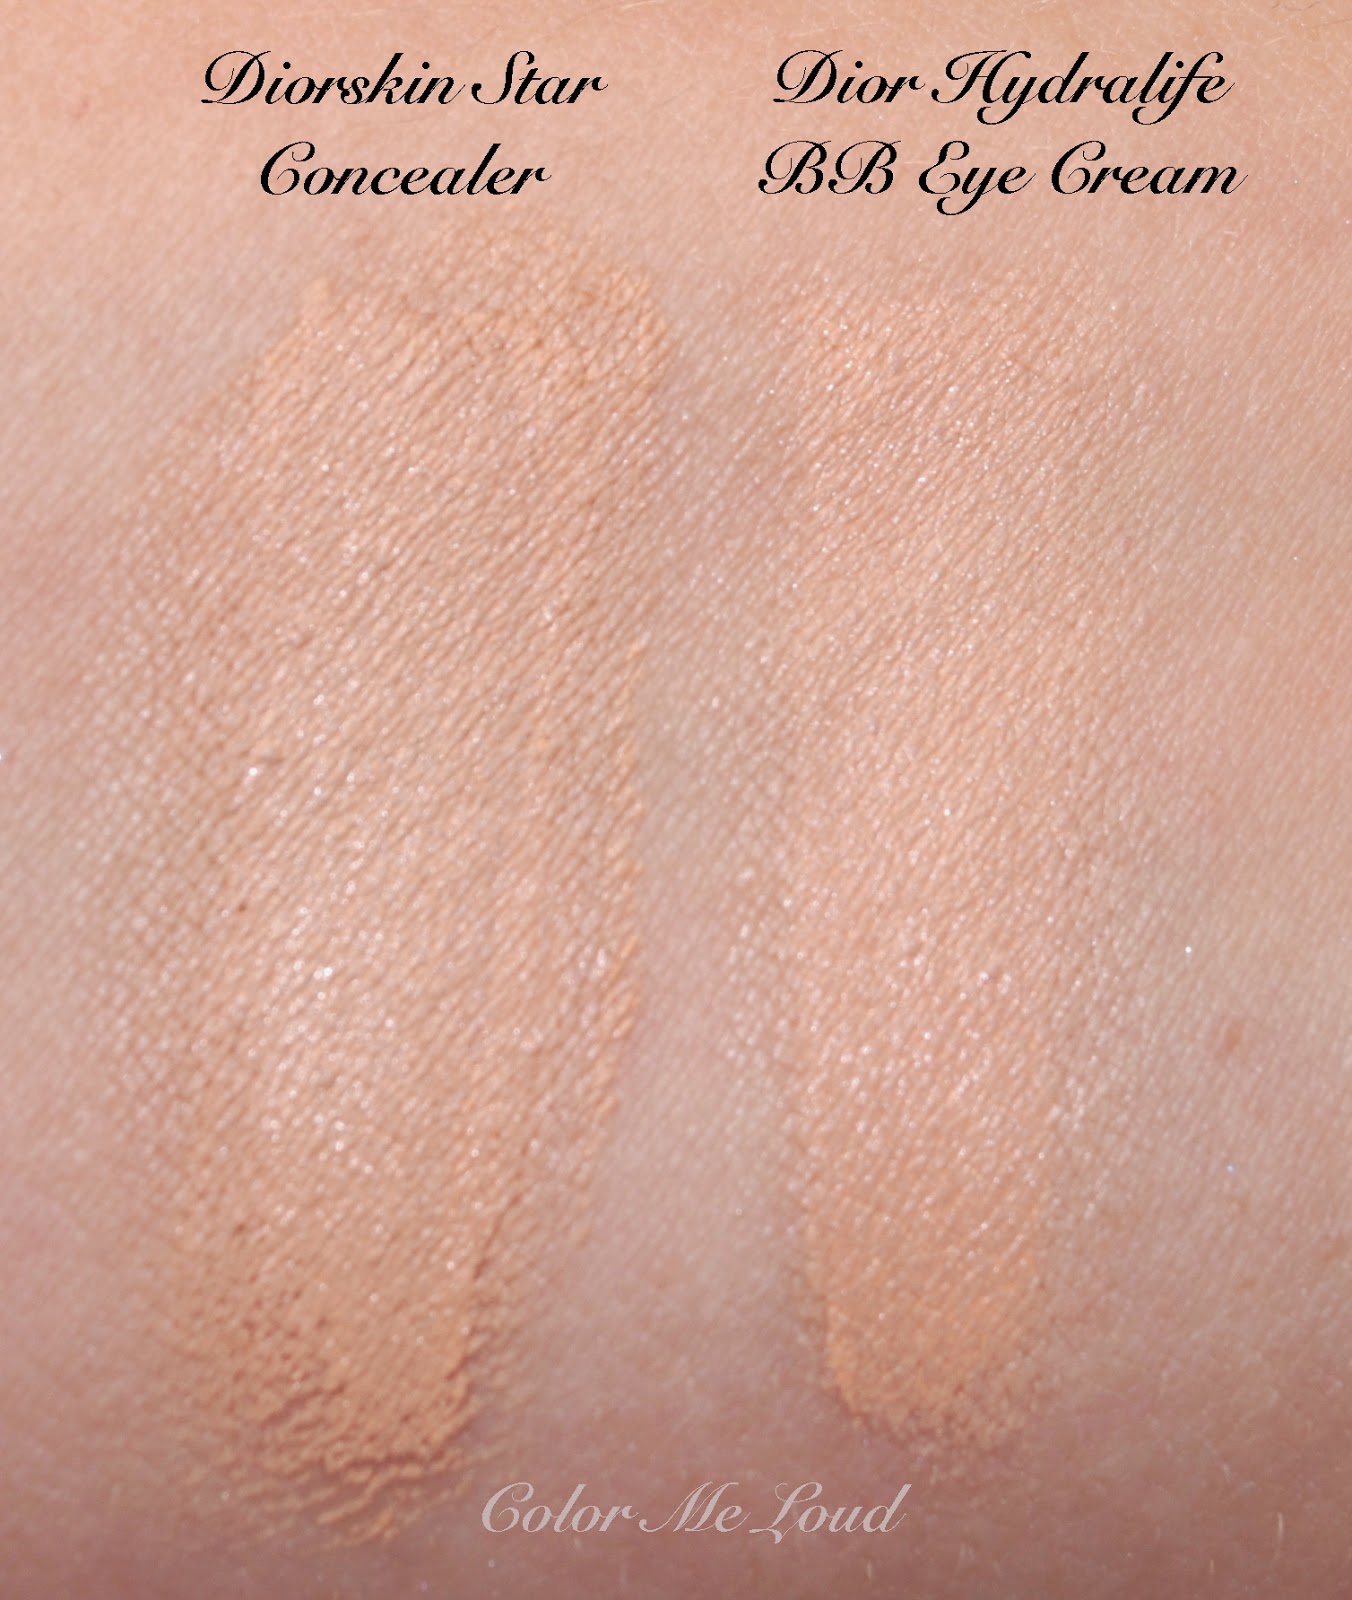 Diorskin Star Concealer, Swatch & Review, Comparison with Dior Hydra BB Eye Cream | Color Me